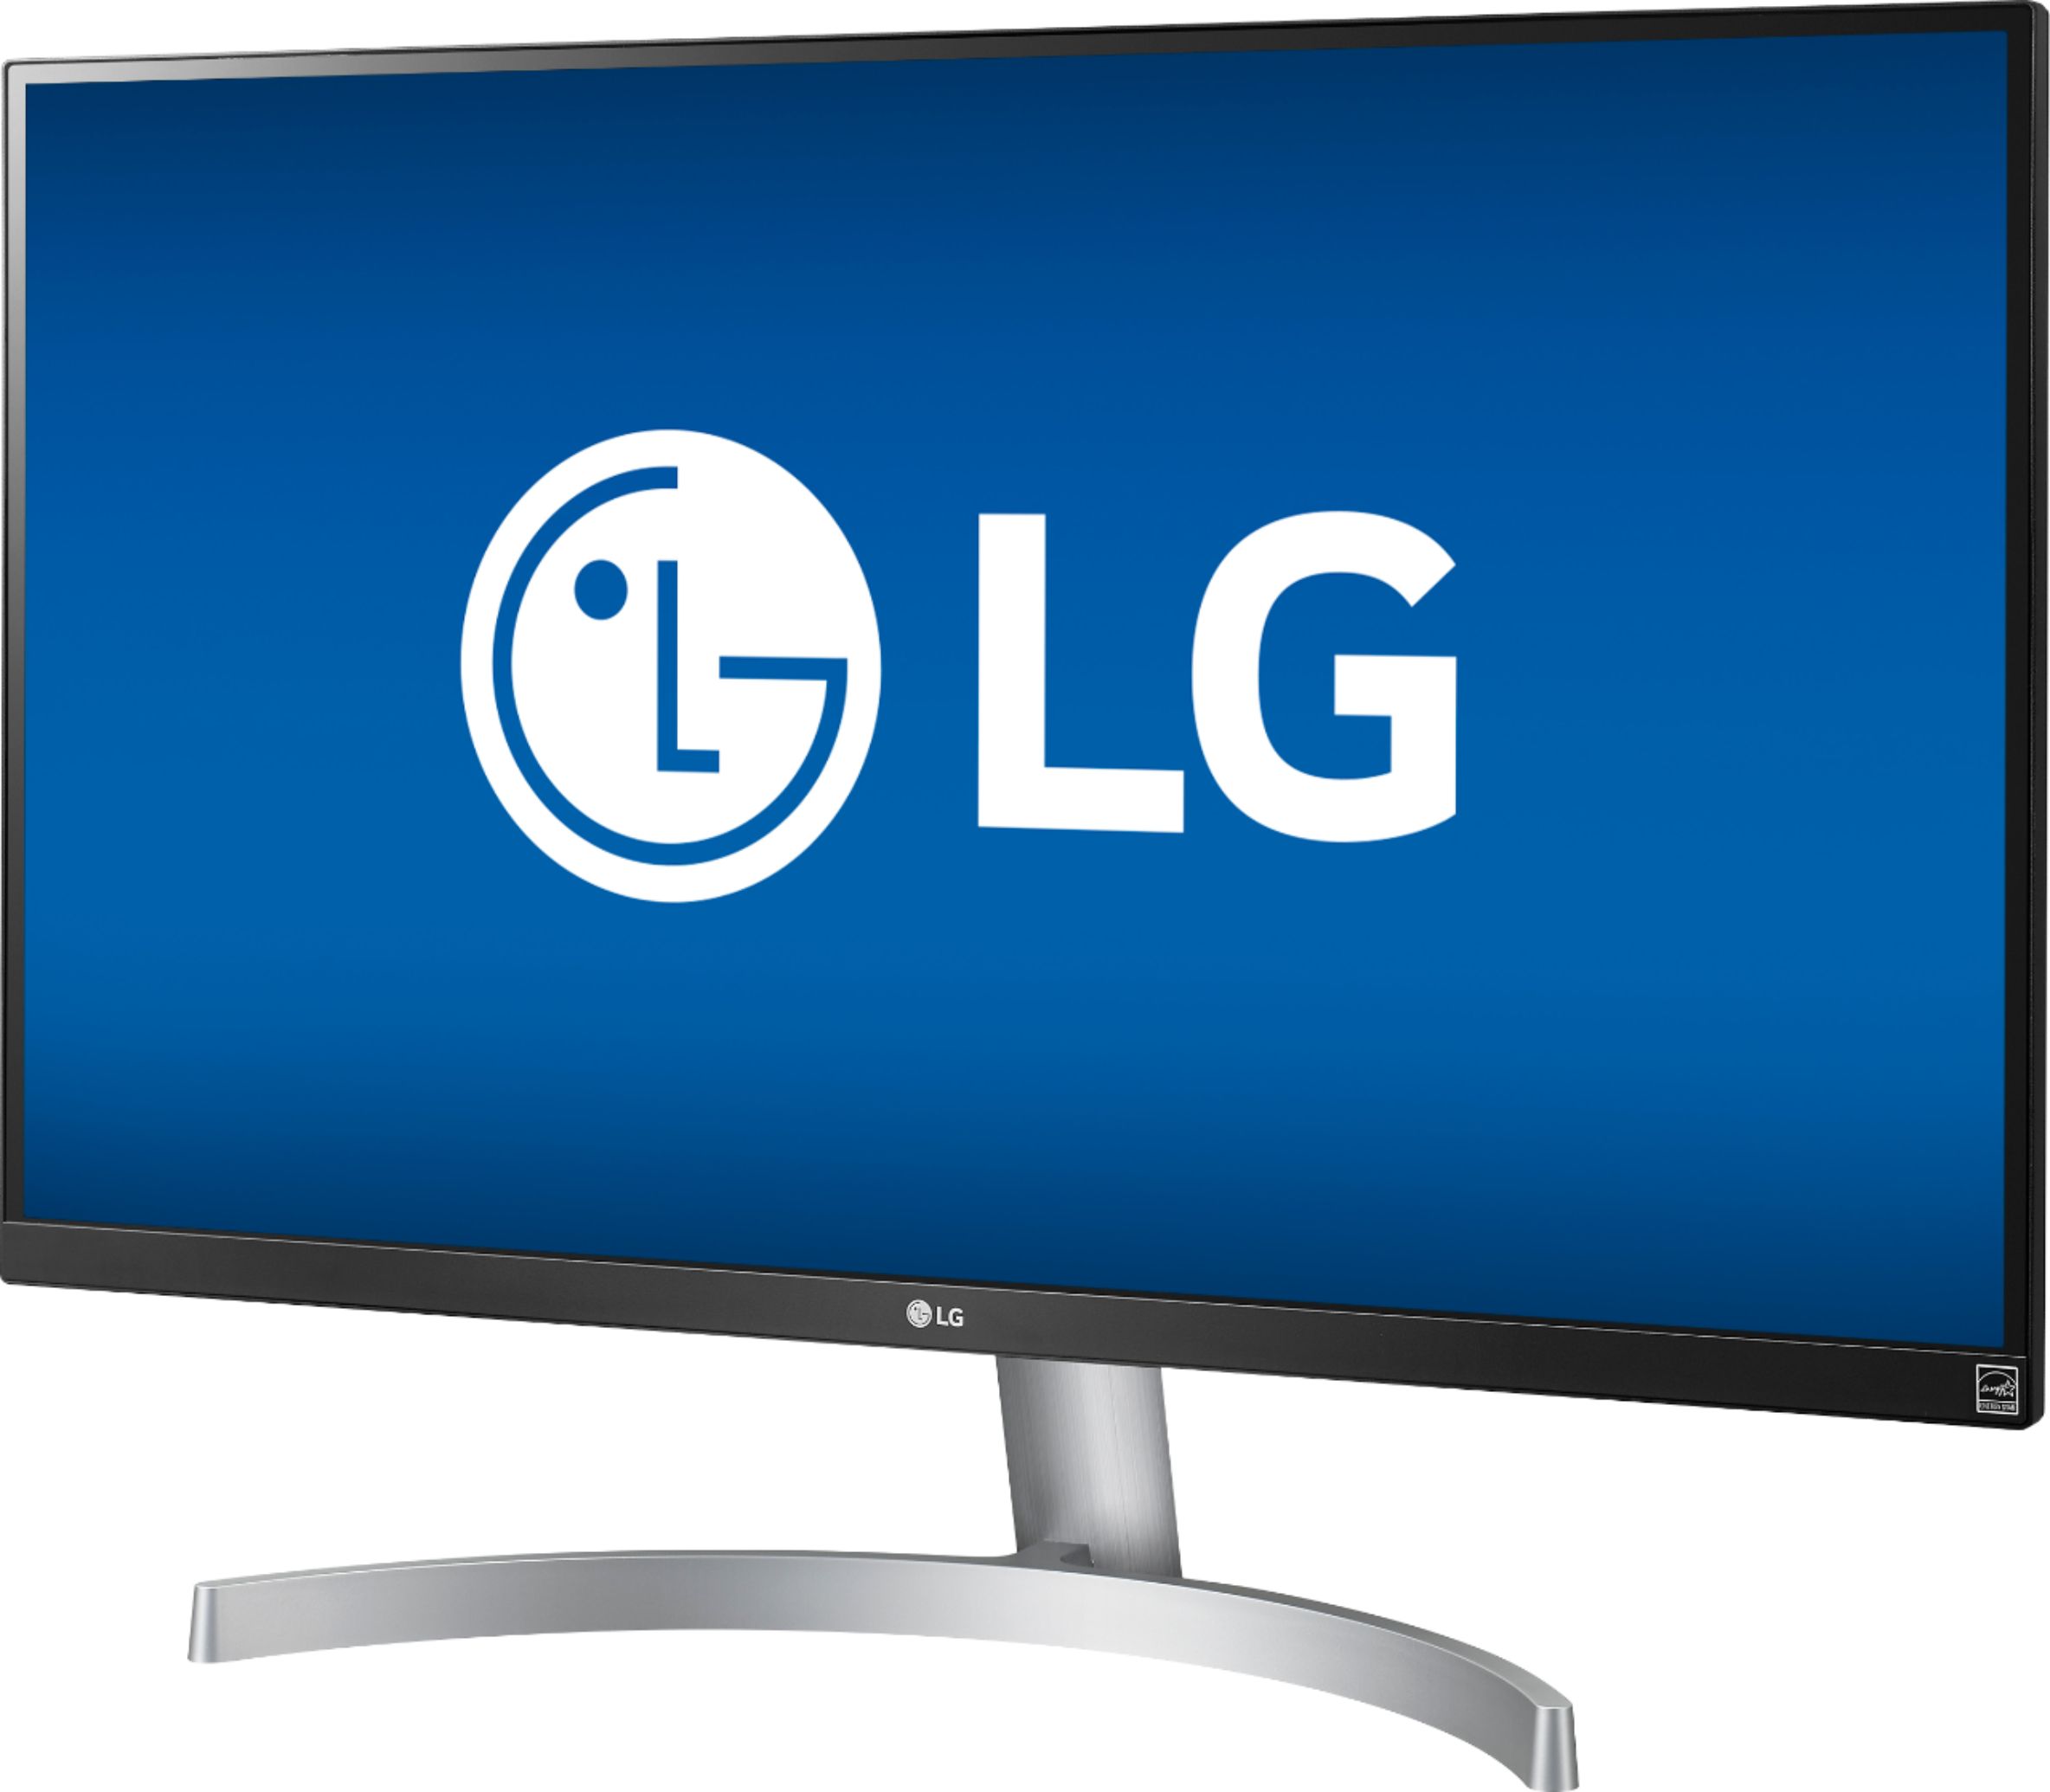 Left View: LG - Geek Squad Certified Refurbished 27UL600-W 27" IPS LED 4K UHD FreeSync Monitor with HDR - Silver/White